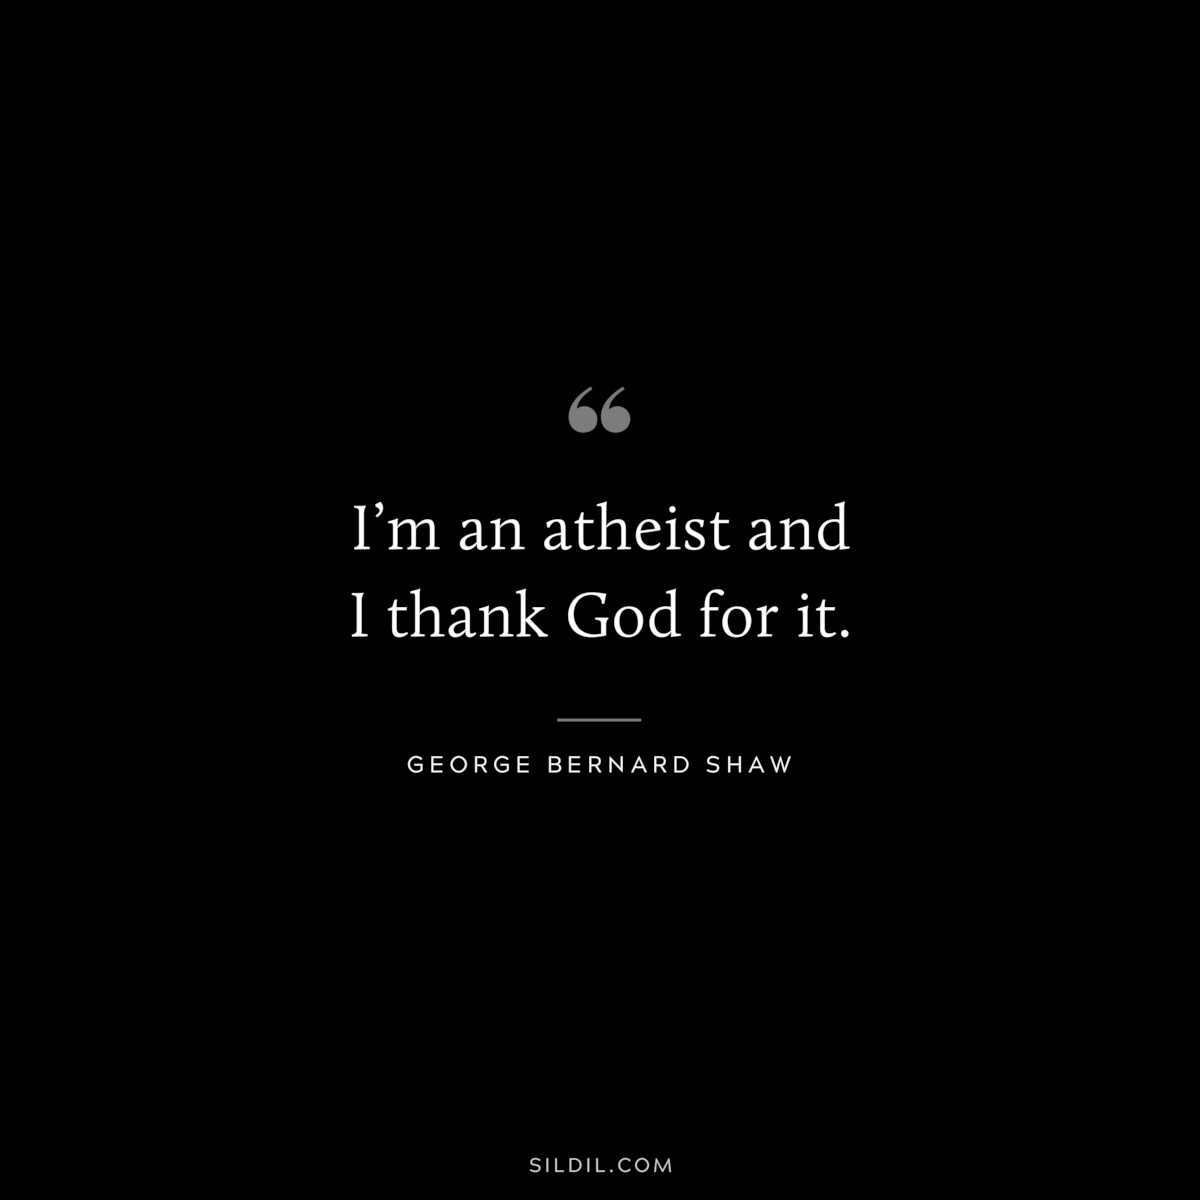 I’m an atheist and I thank God for it. ― George Bernard Shaw